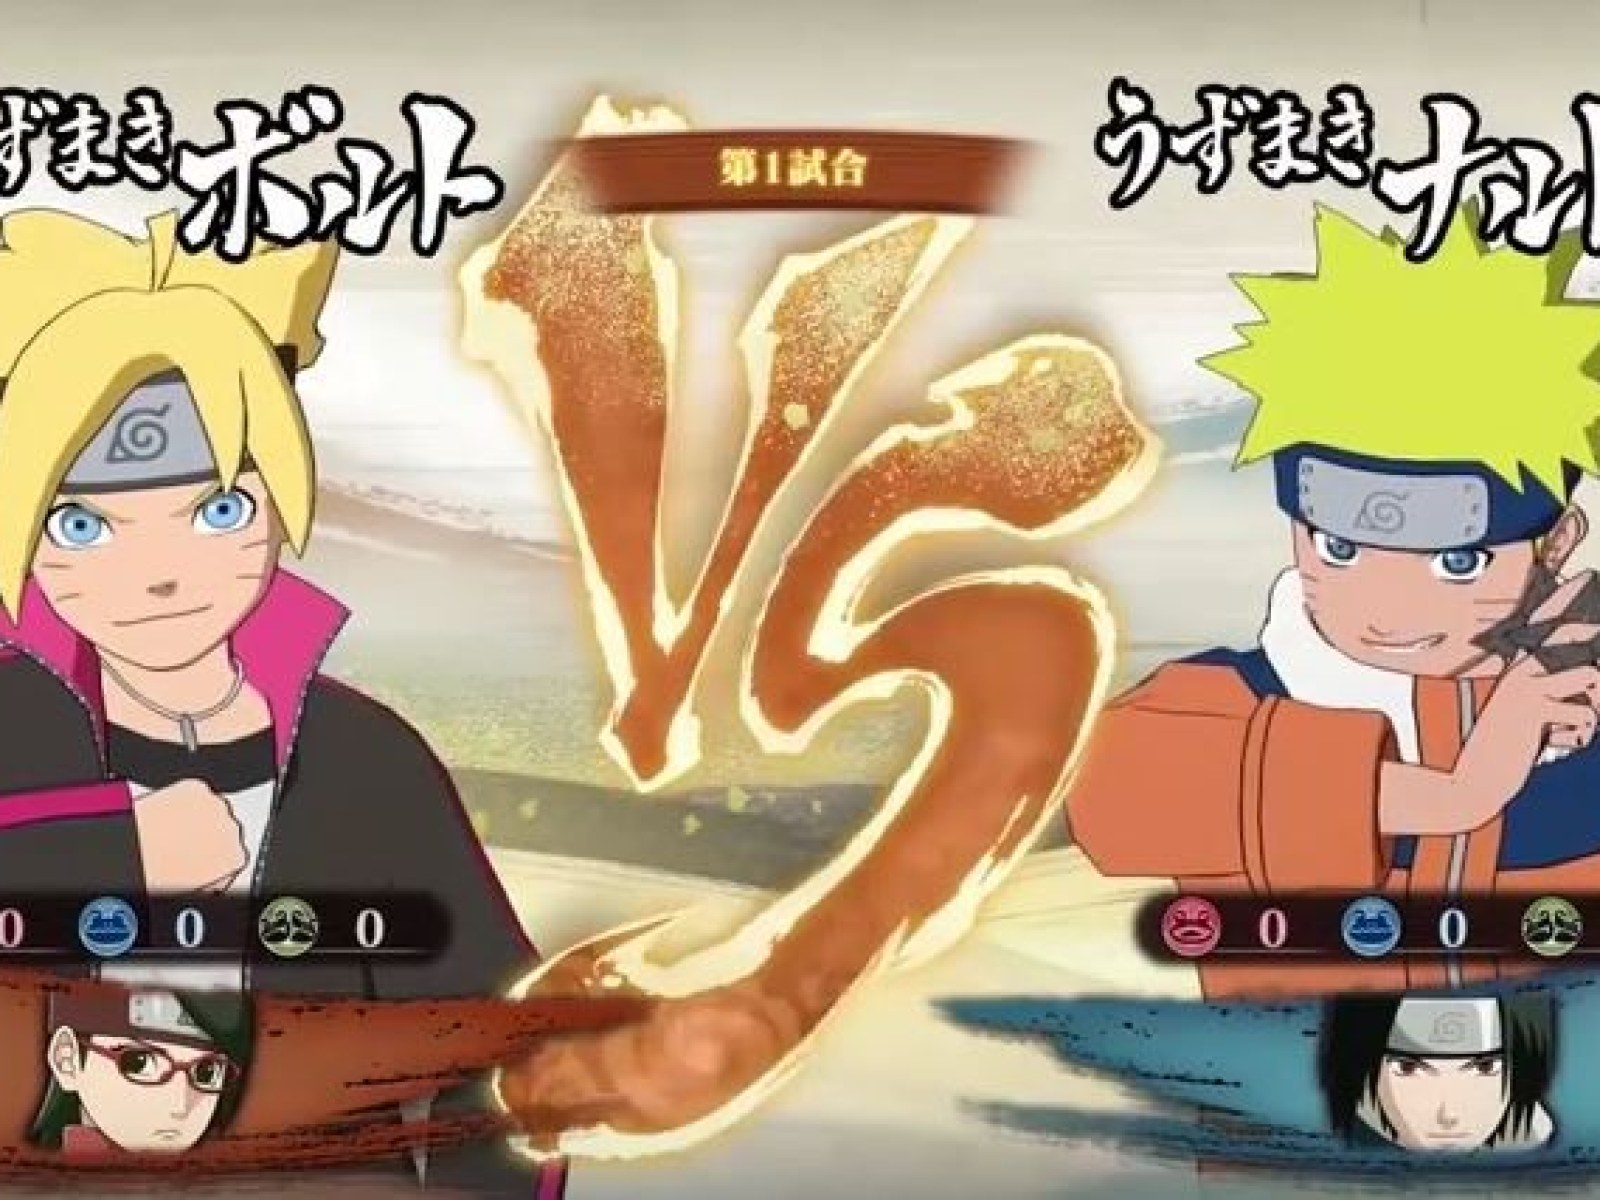 Naruto Shippuden: Ultimate Ninja Storm 4' Battle Guide: Secret Techniques,  Substitution And More Explained [VIDEO]